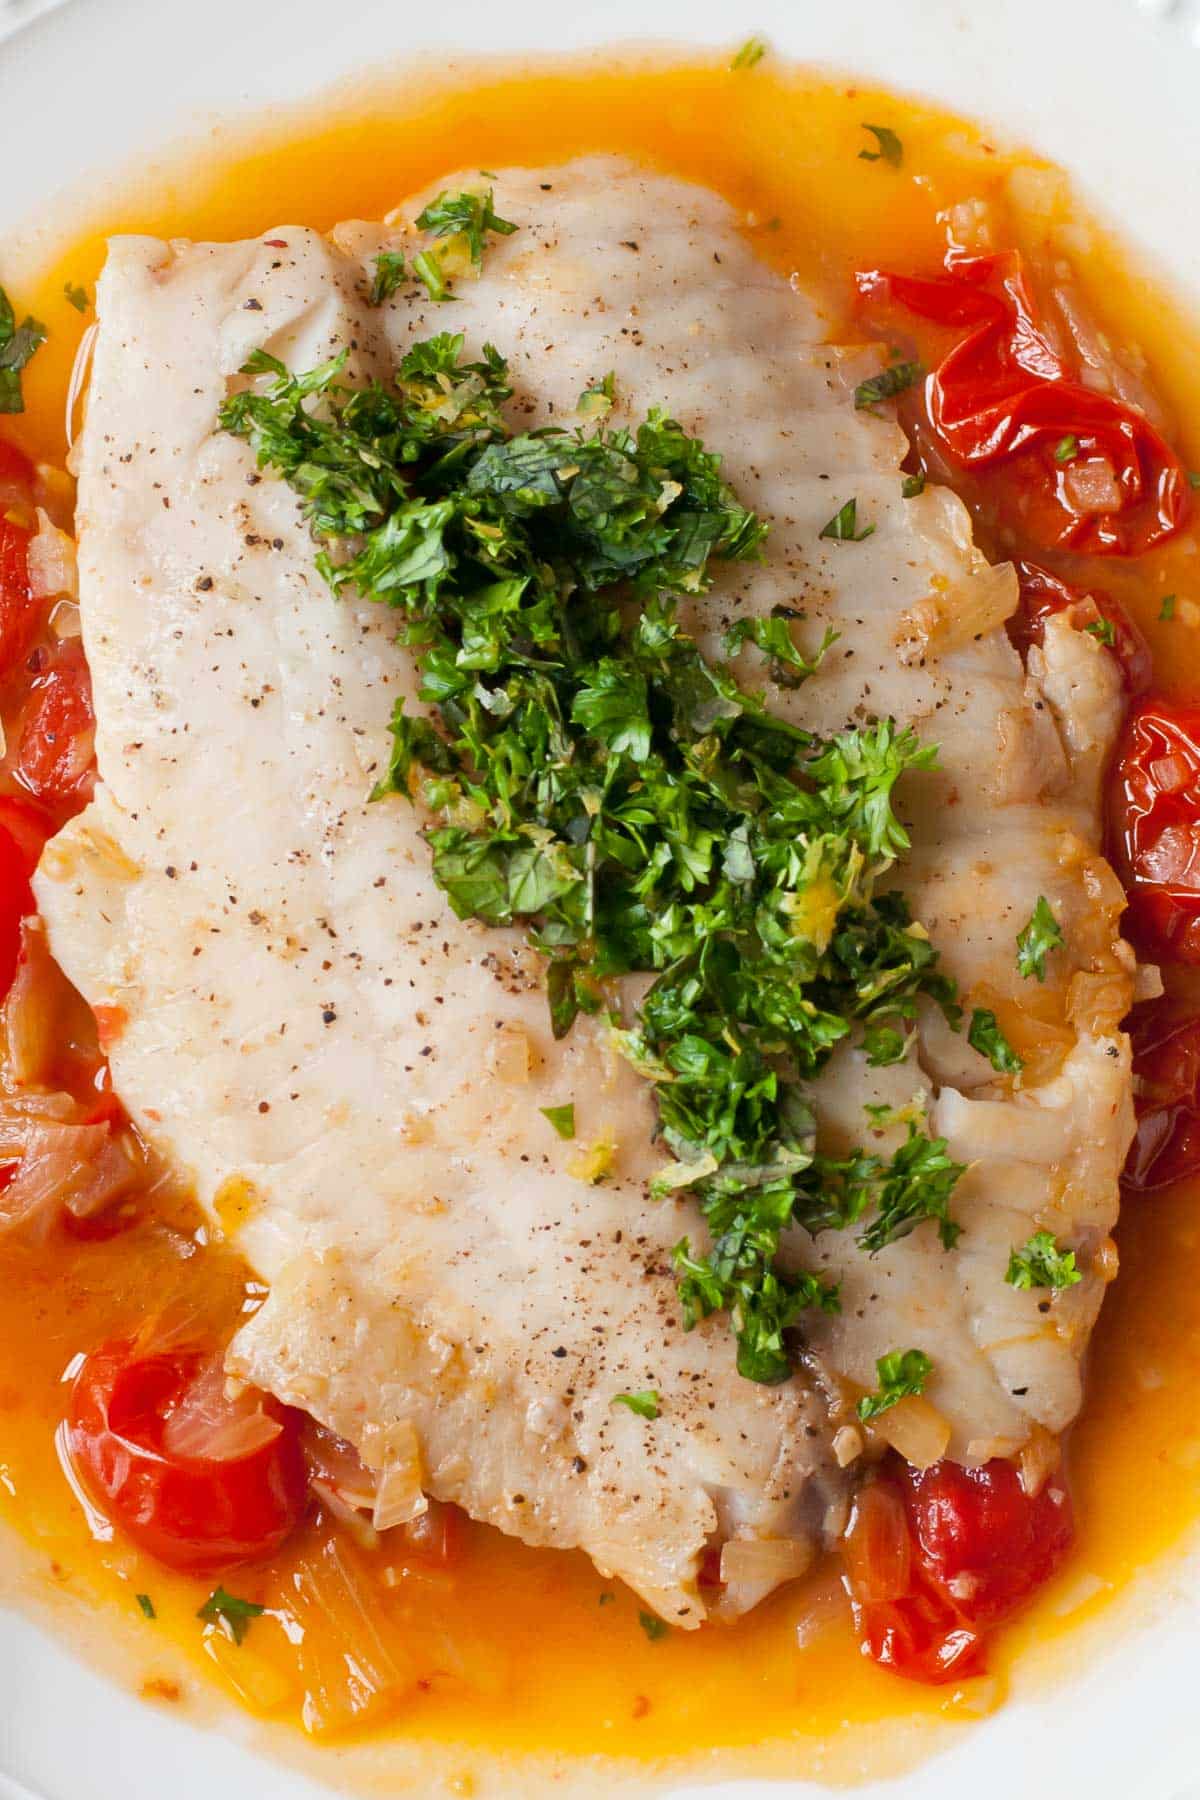 Tilapia filet poached in tomato broth with fresh parsley and mint.